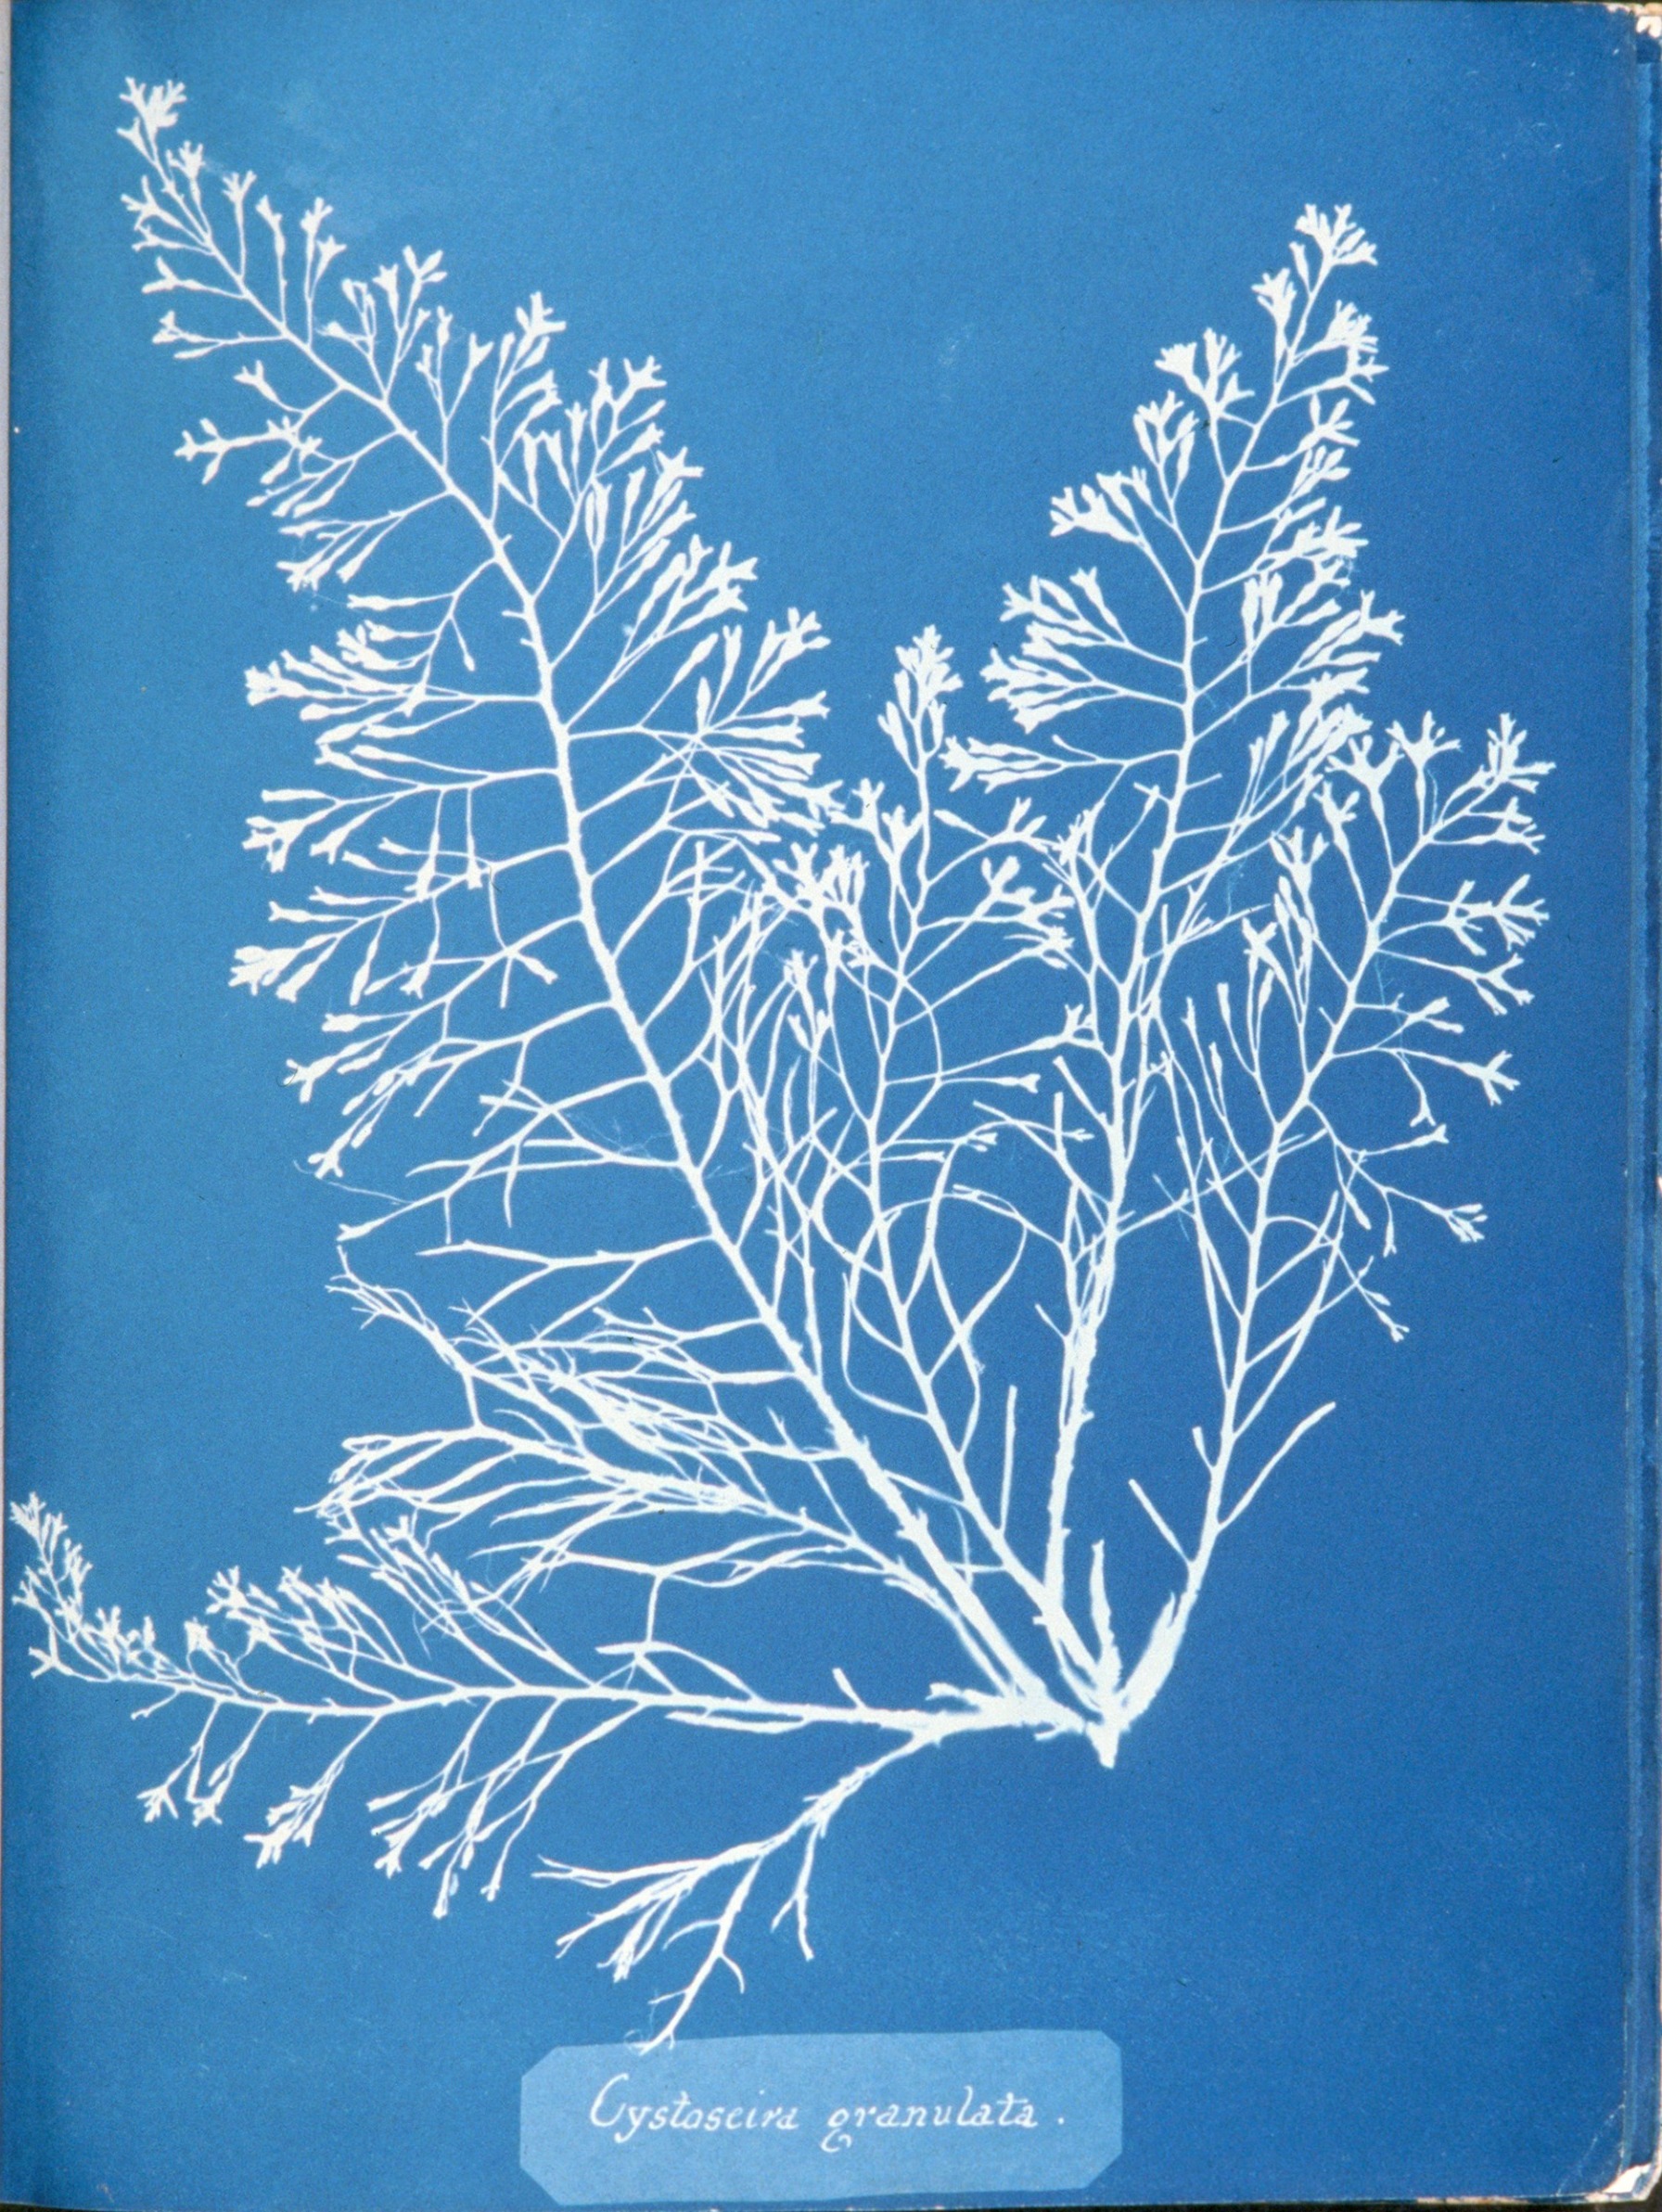 By Anna Atkins - Photographs of British Algae: Cyanotype Impressions (1843), Public Domain, https://commons.wikimedia.org/w/index.php?curid=2760348